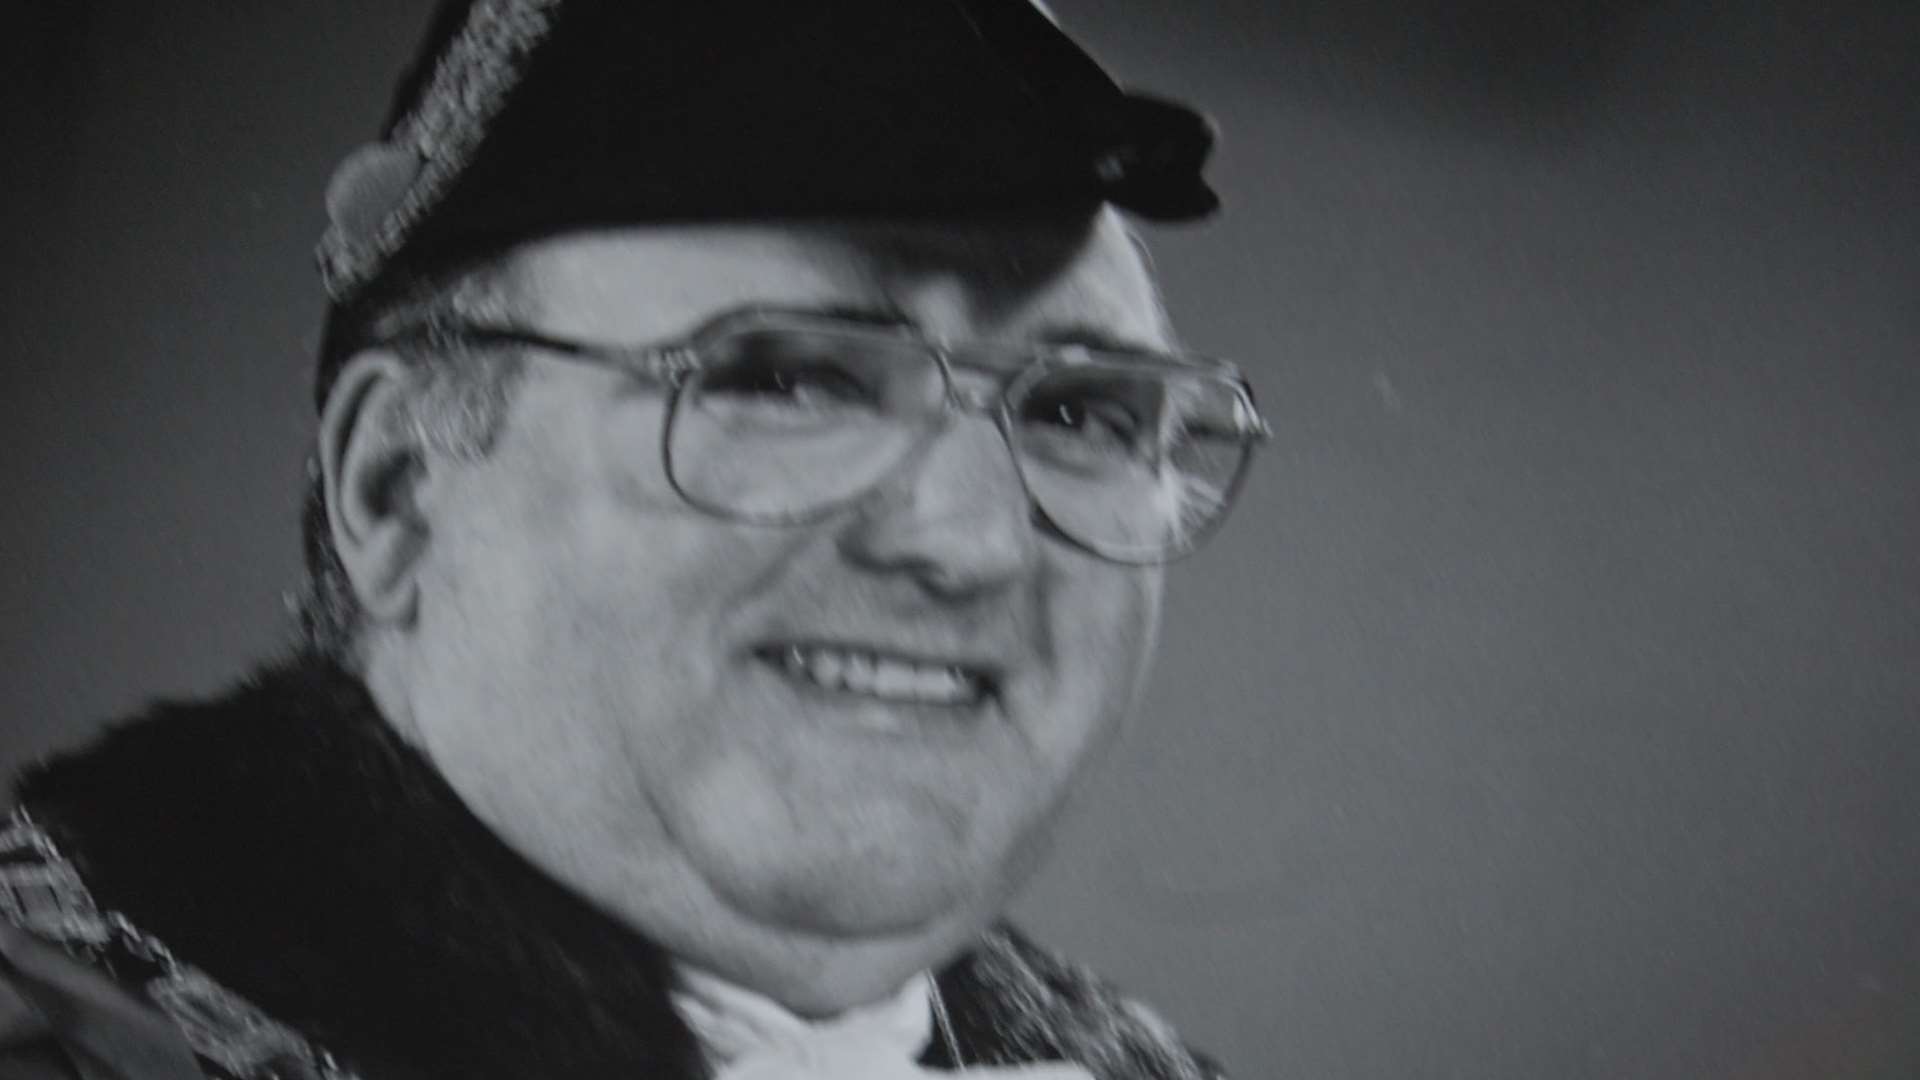 Former Mayor of Dartford Tony Gillham, who has passed away at the age of 82.